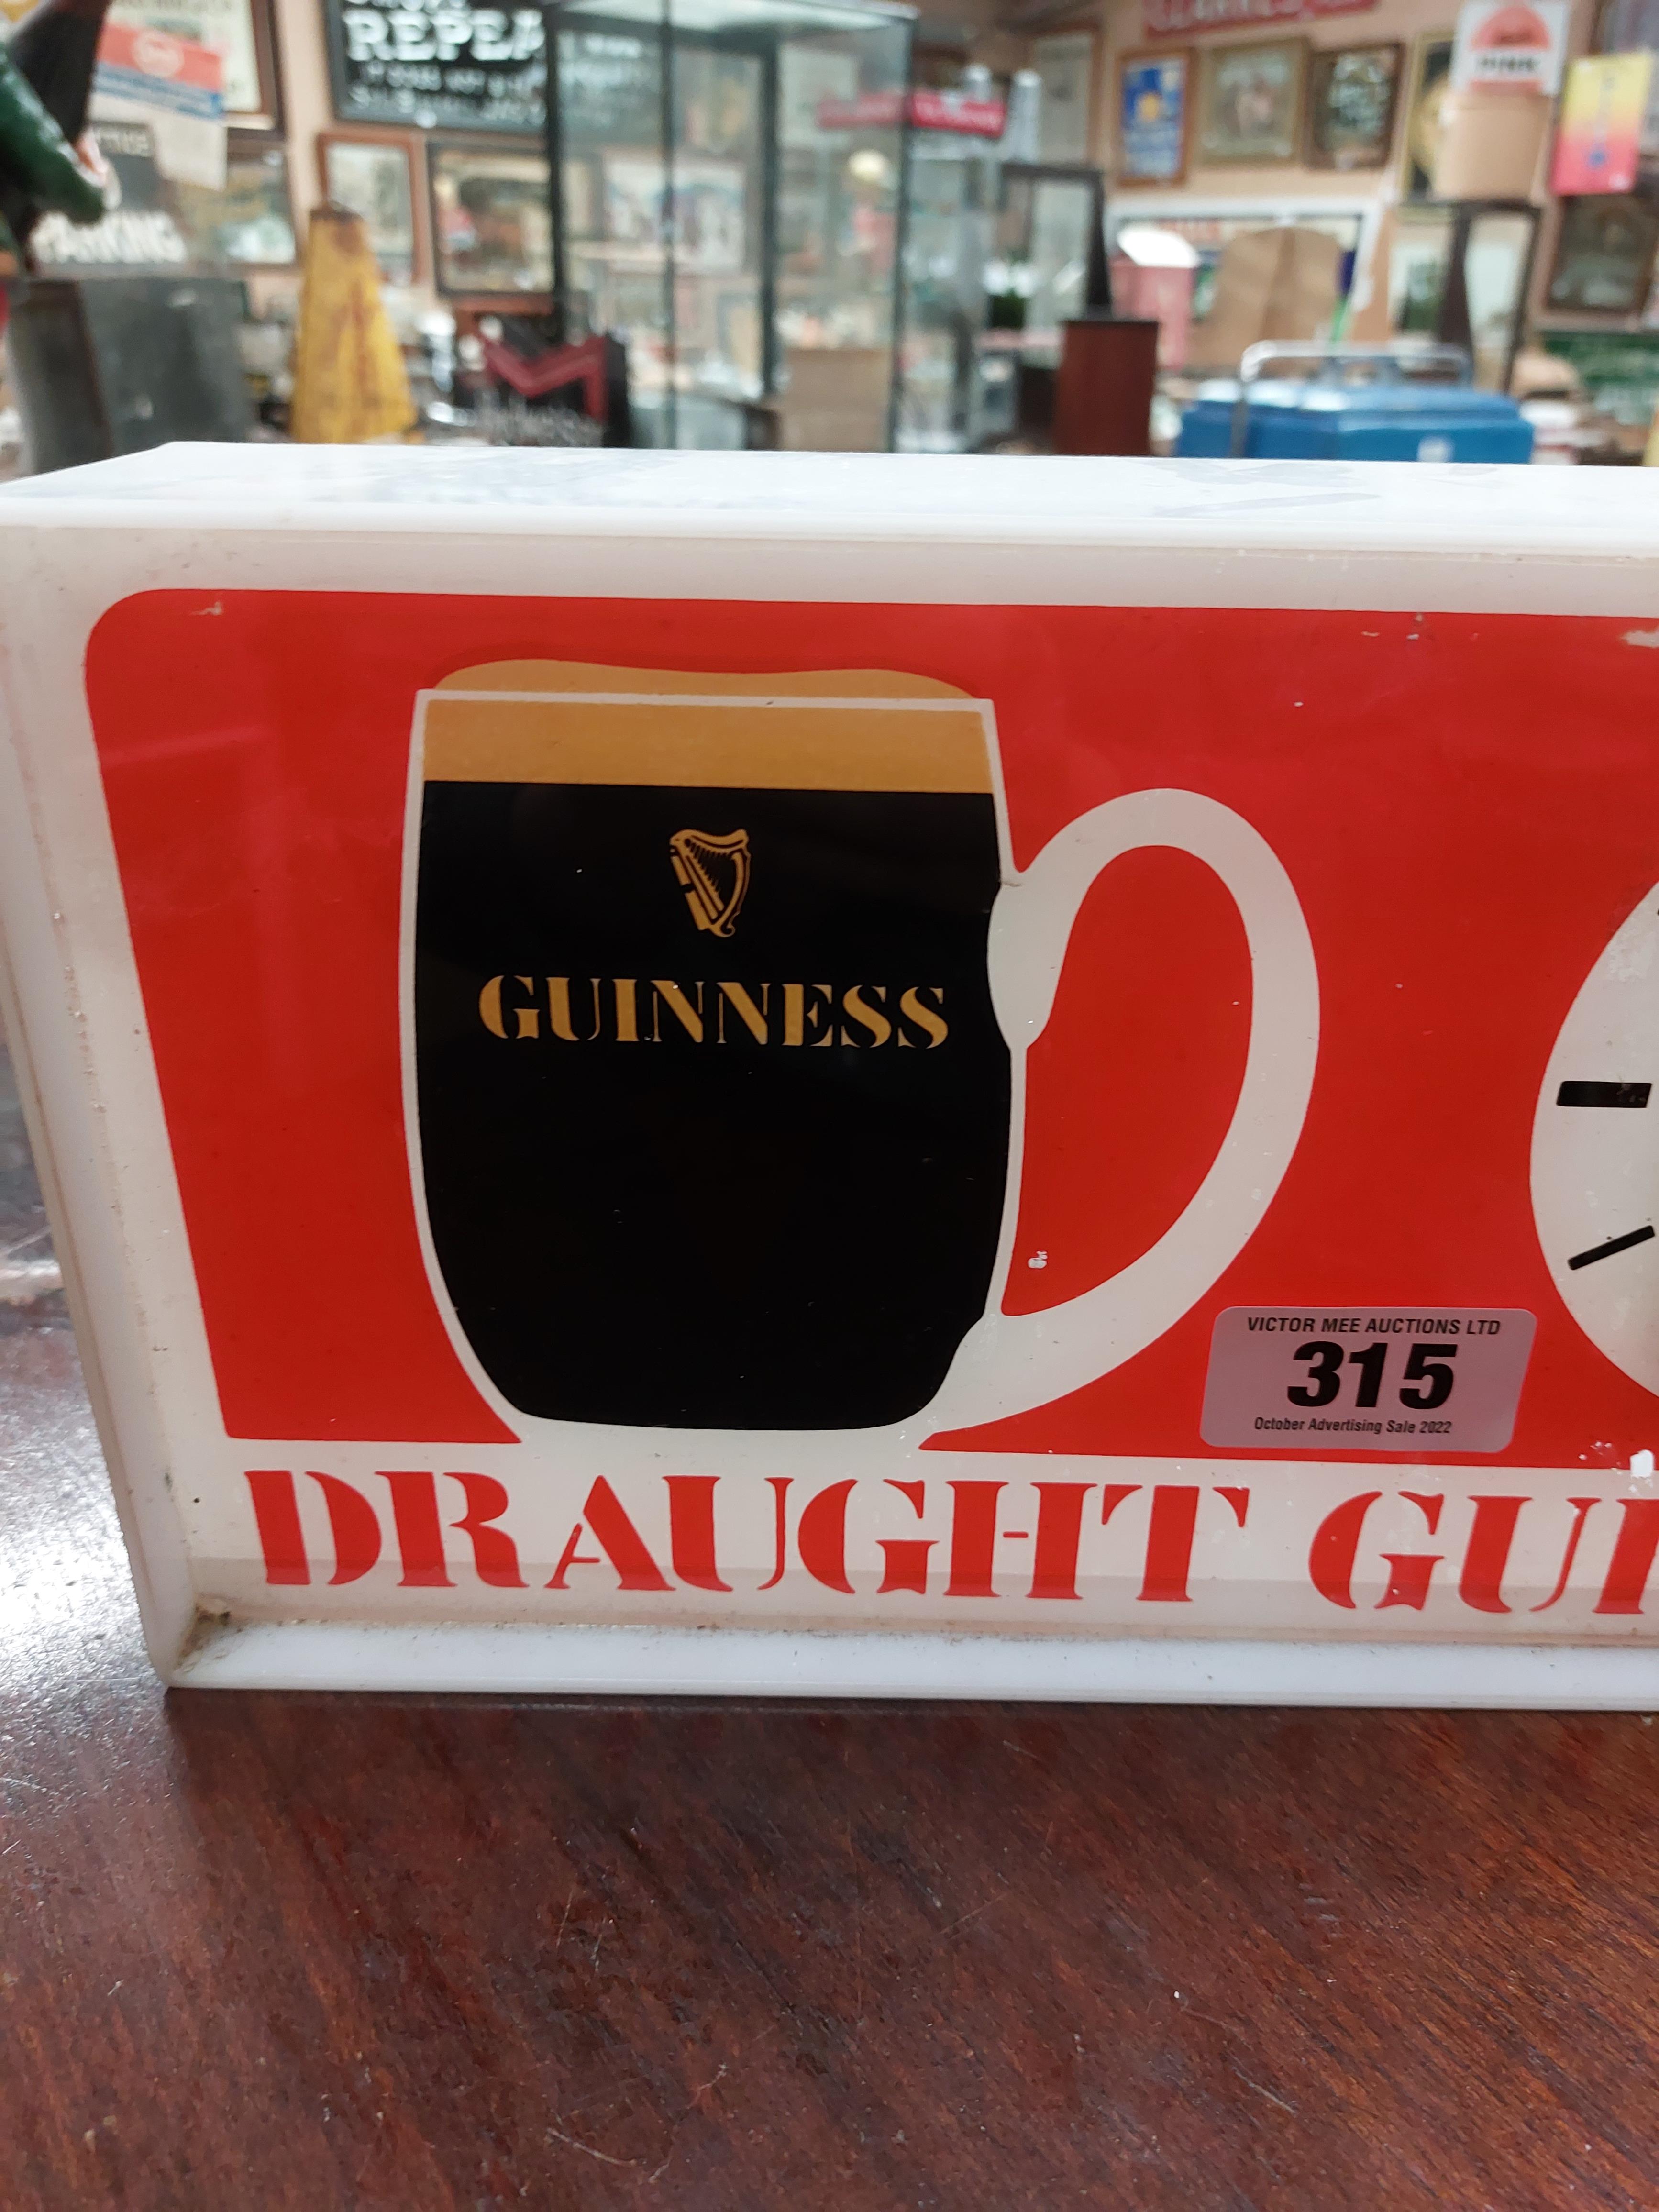 Perspex Draught Guinness light up advertising clock { 18 cm H x 36 cm W x 7 cm D}. - Image 2 of 3